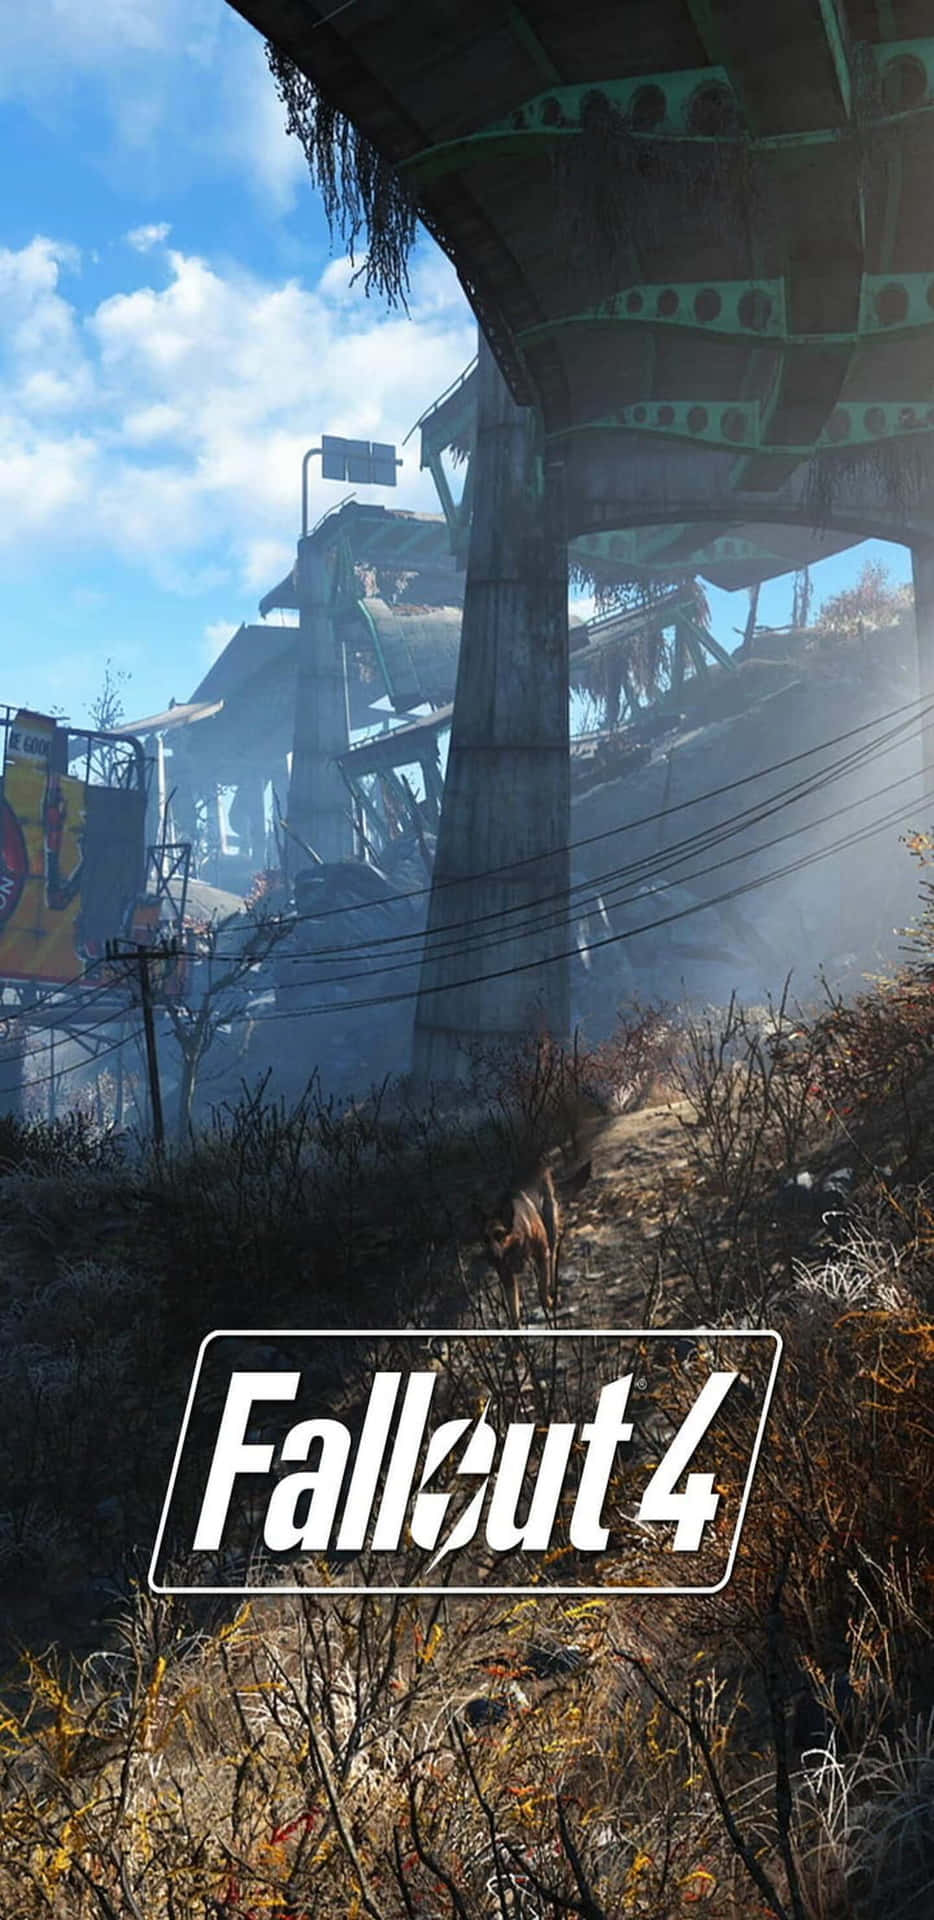 Explore the post-apocalyptic world of Fallout 76 on your Pixel 3XL